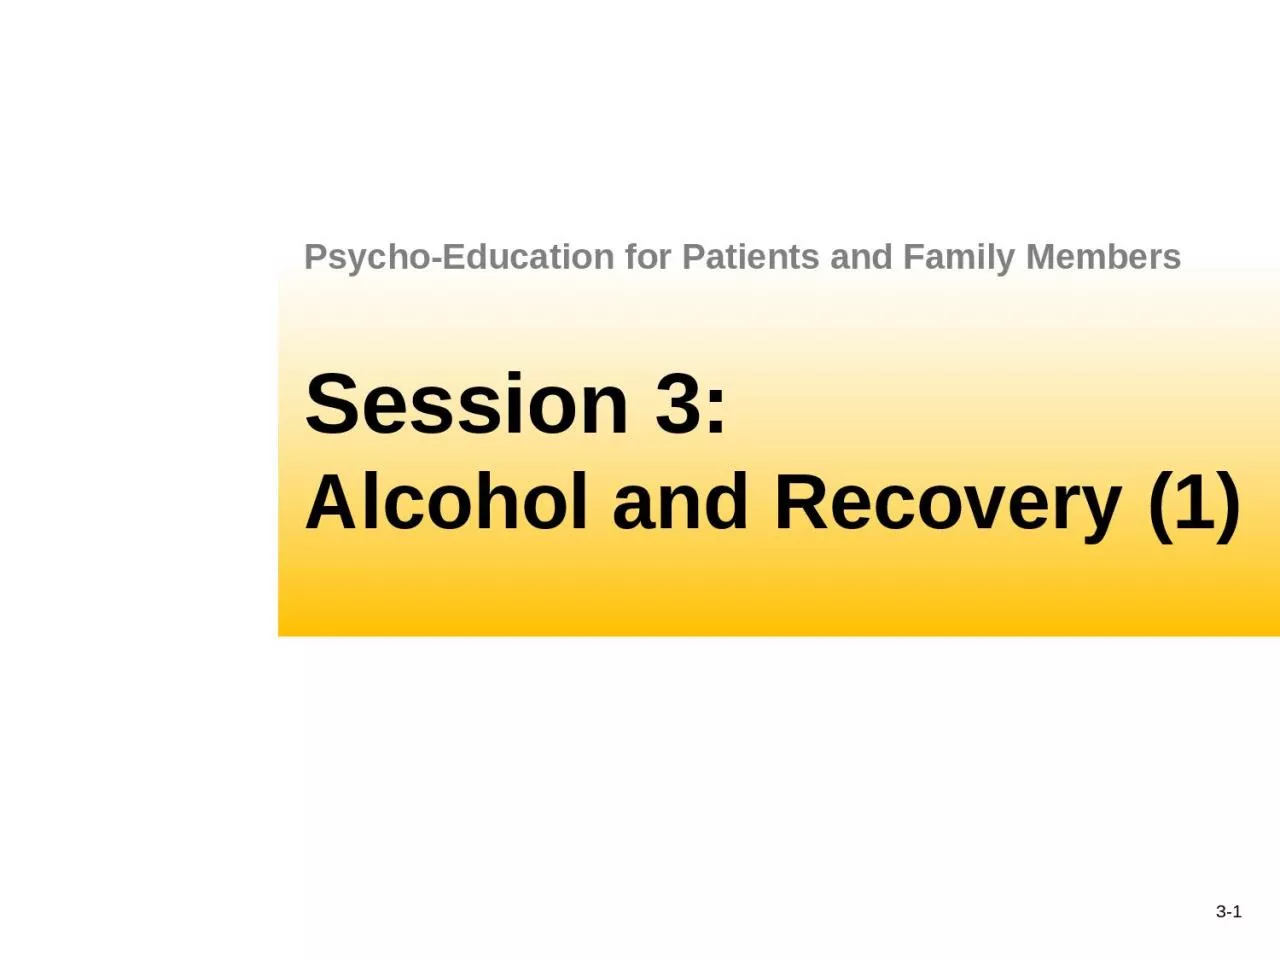 Session 3: Alcohol and Recovery (1)